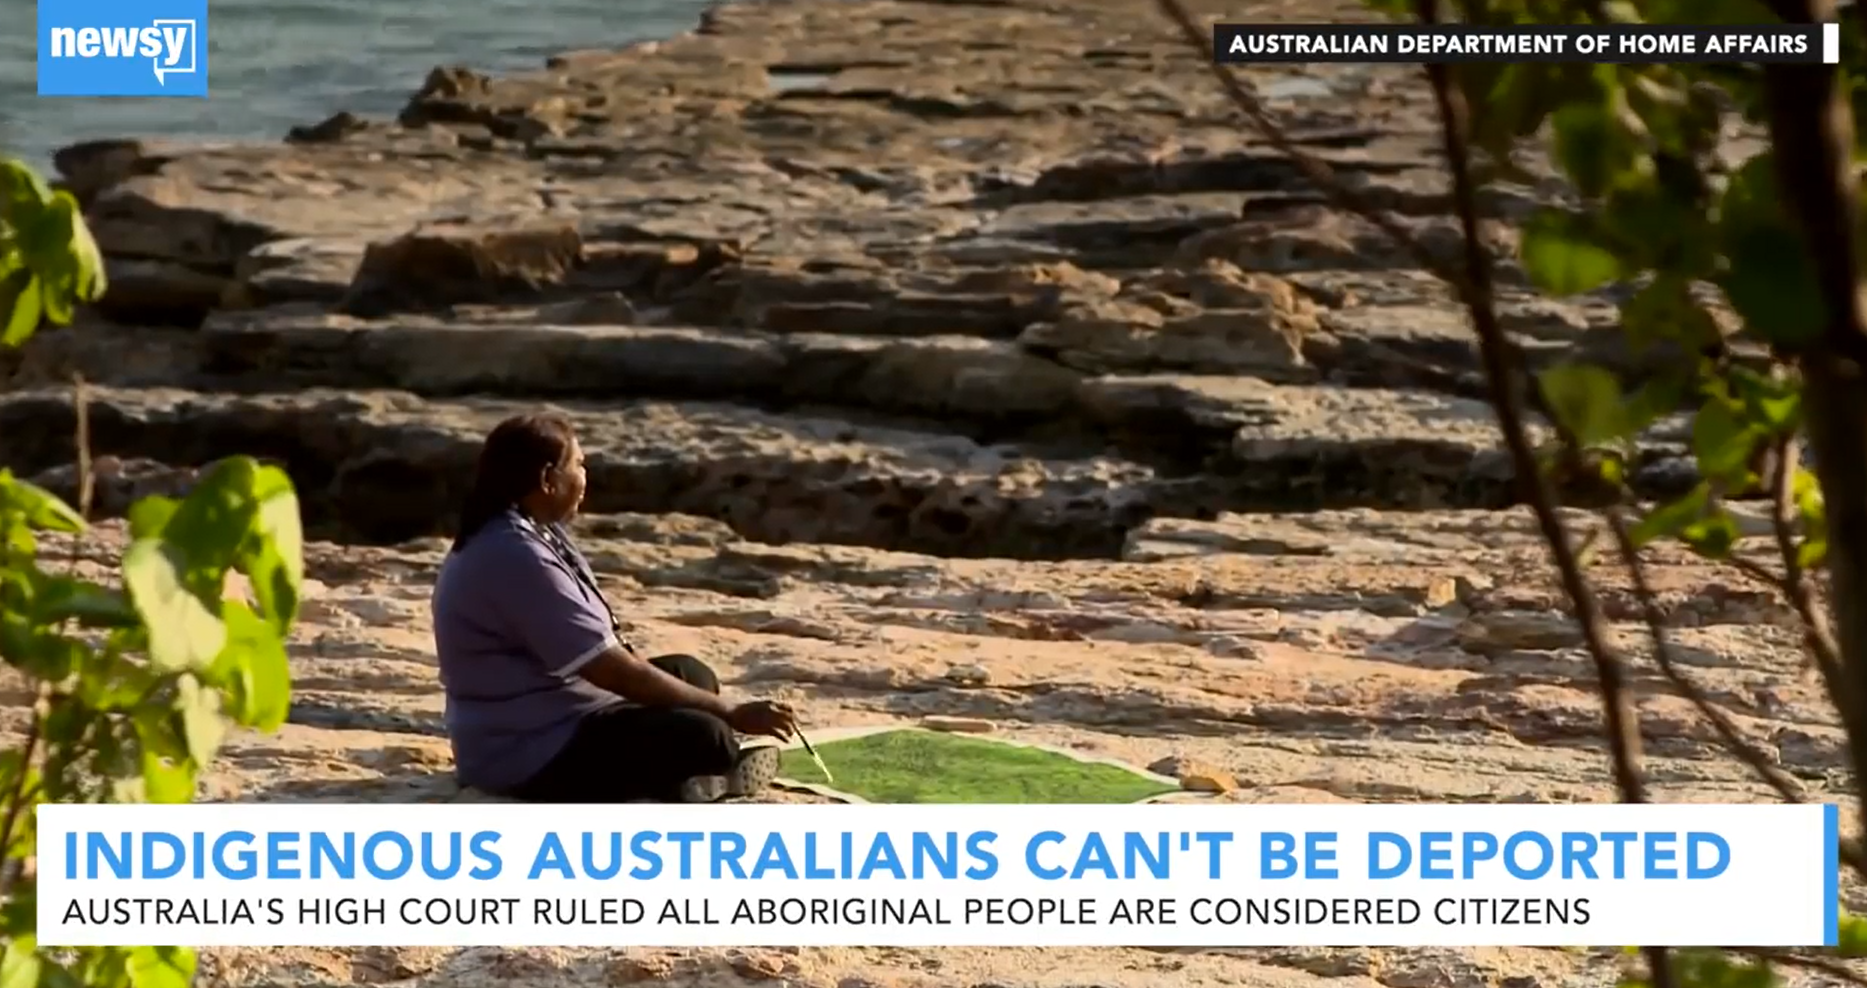 Video – Australia’s High Court rules Aboriginal people are citizens